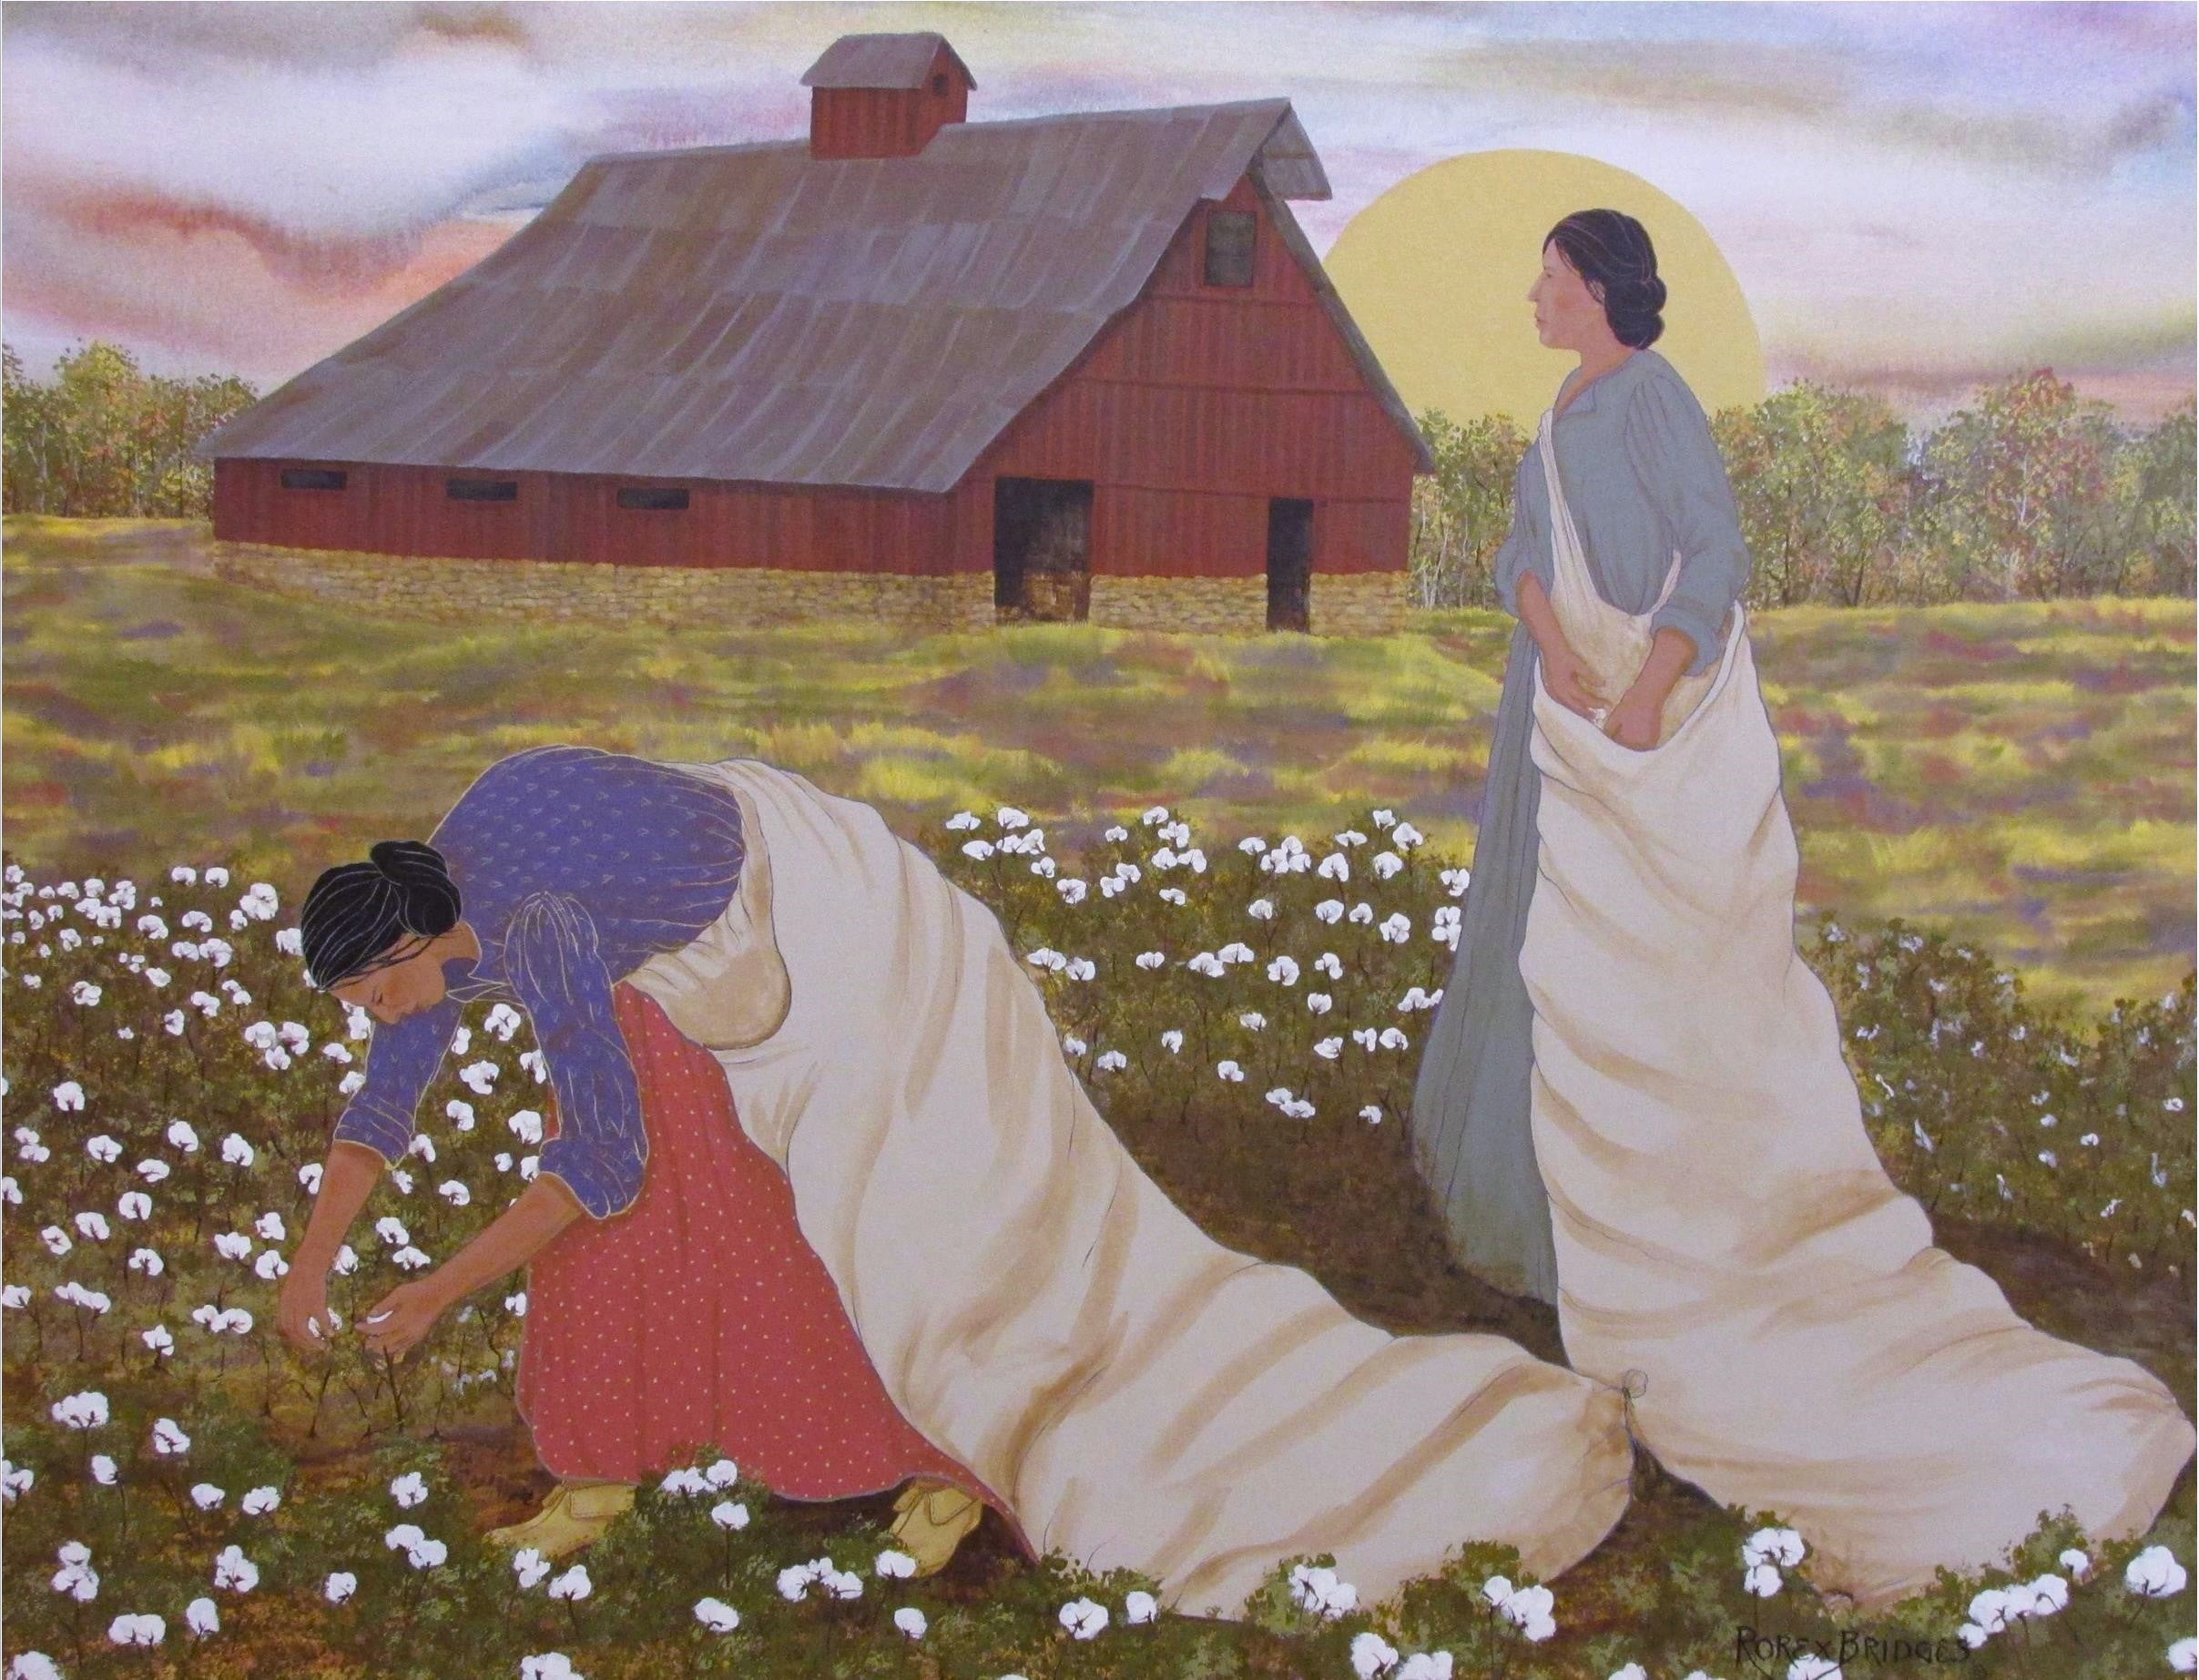 Native women in Indian Territory working their cotton fields